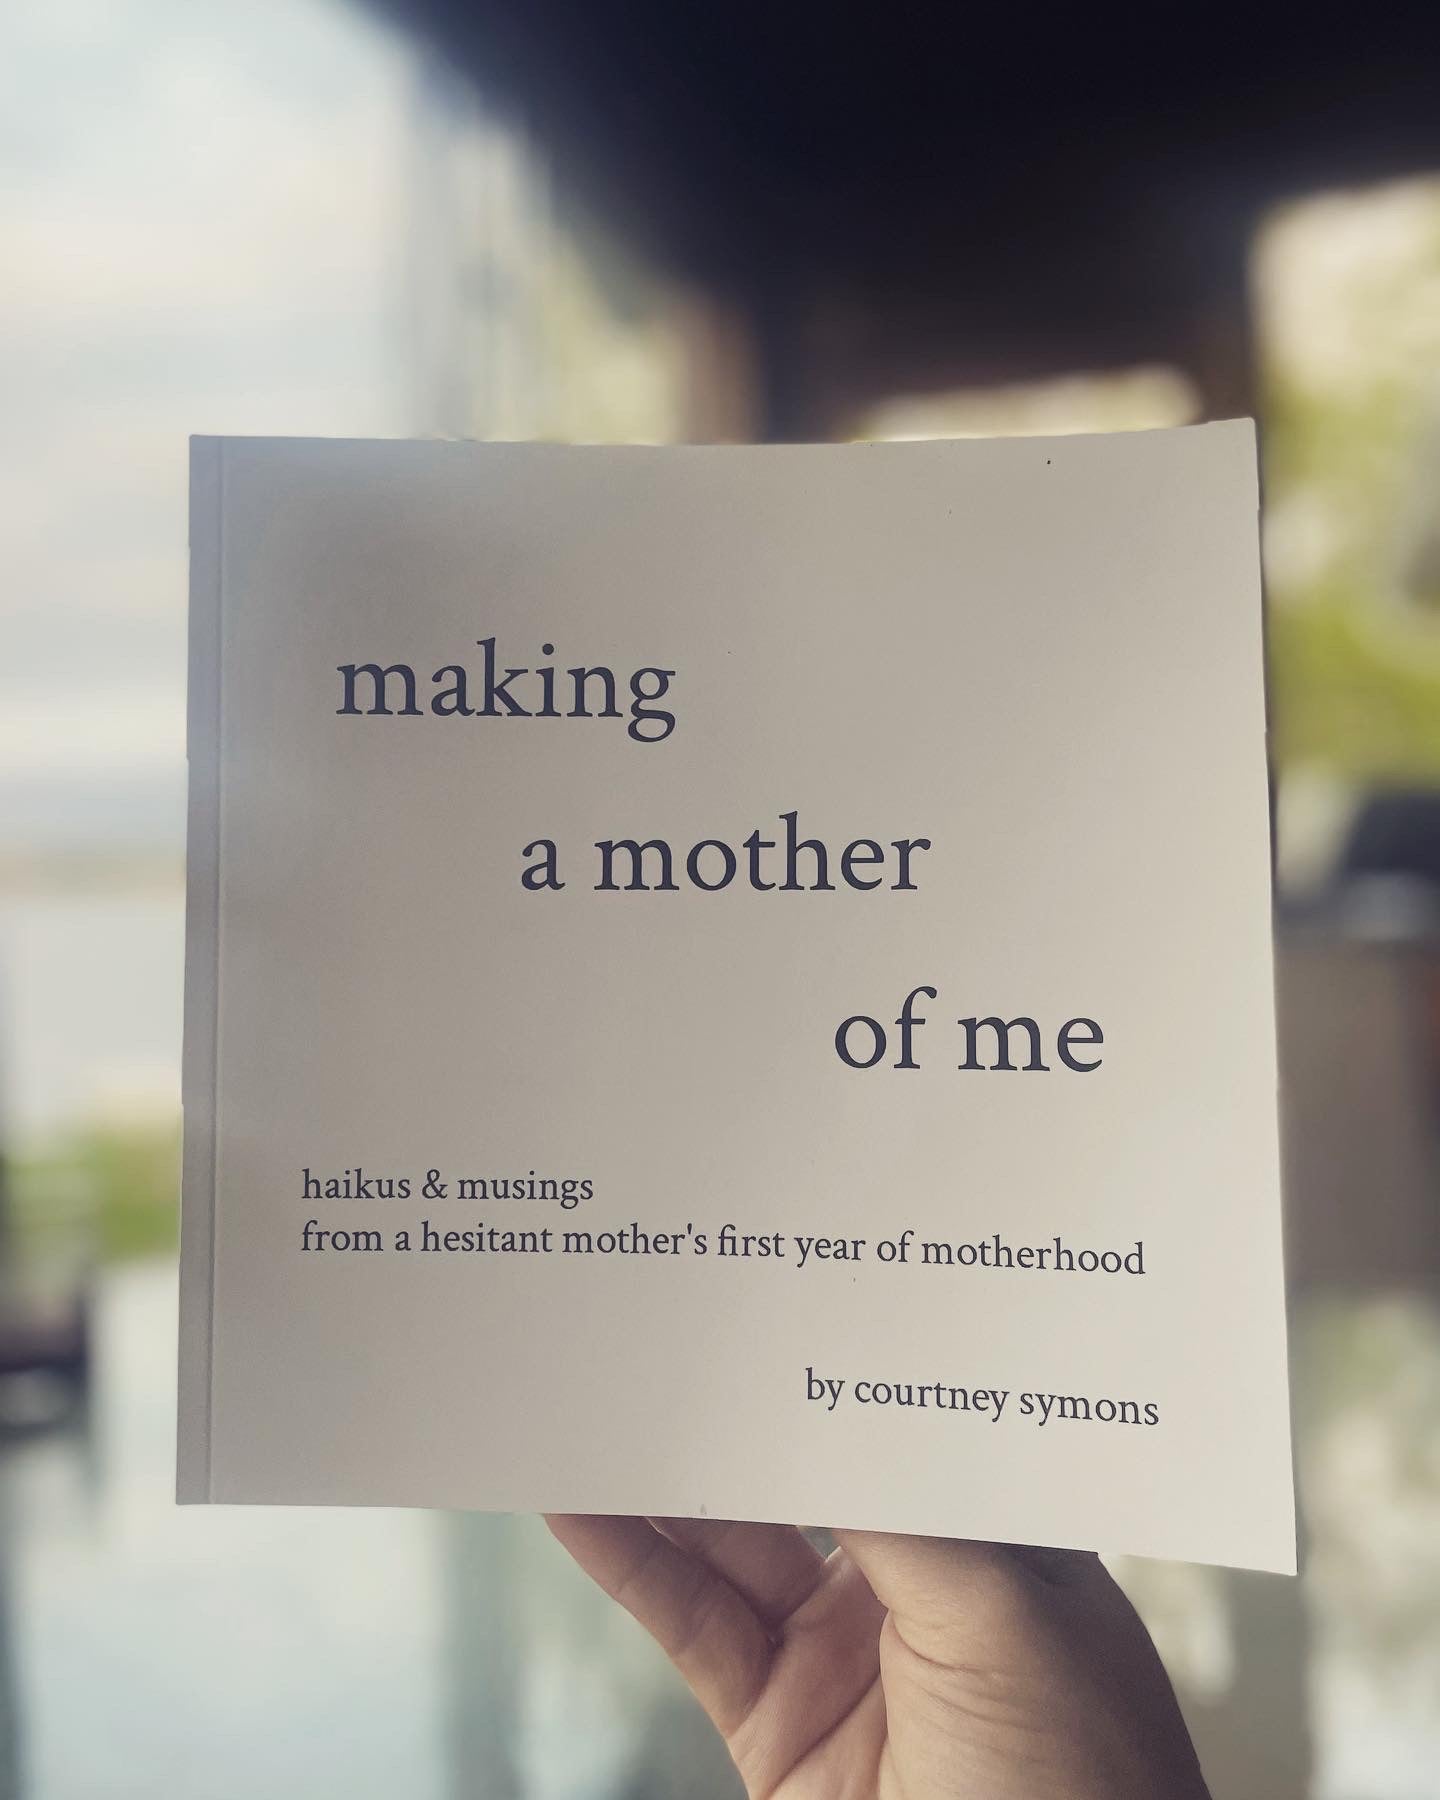 making a mother of me: haikus & musings from a hesitant mother's first year of motherhood